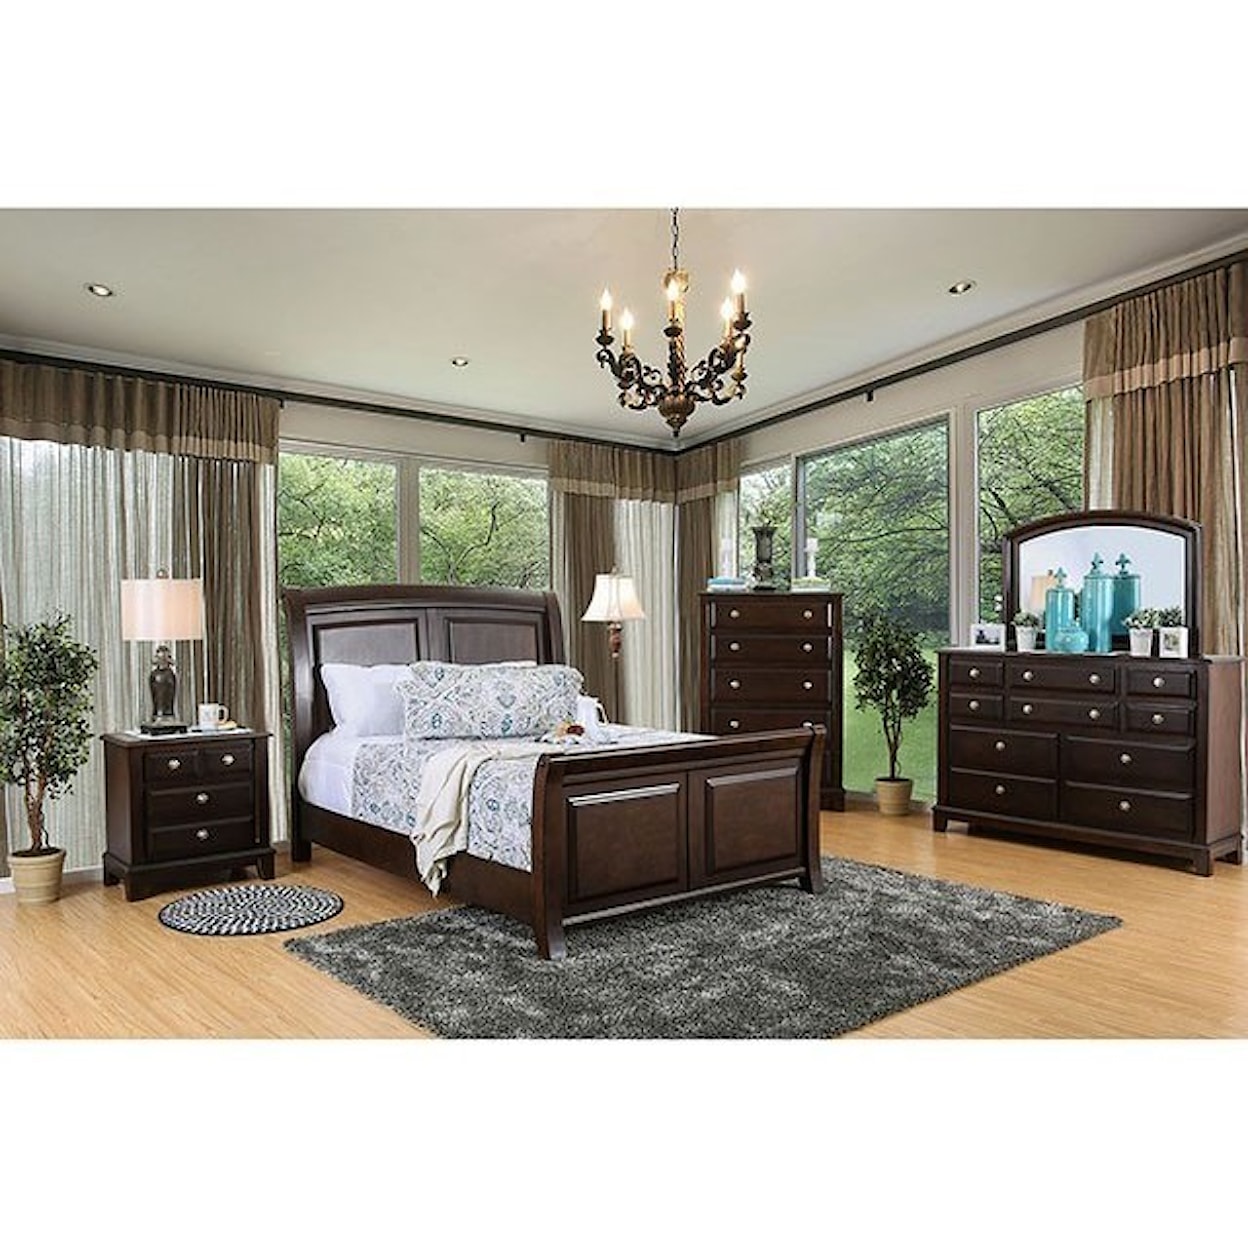 Furniture of America Litchville Cal King Sleigh Bed